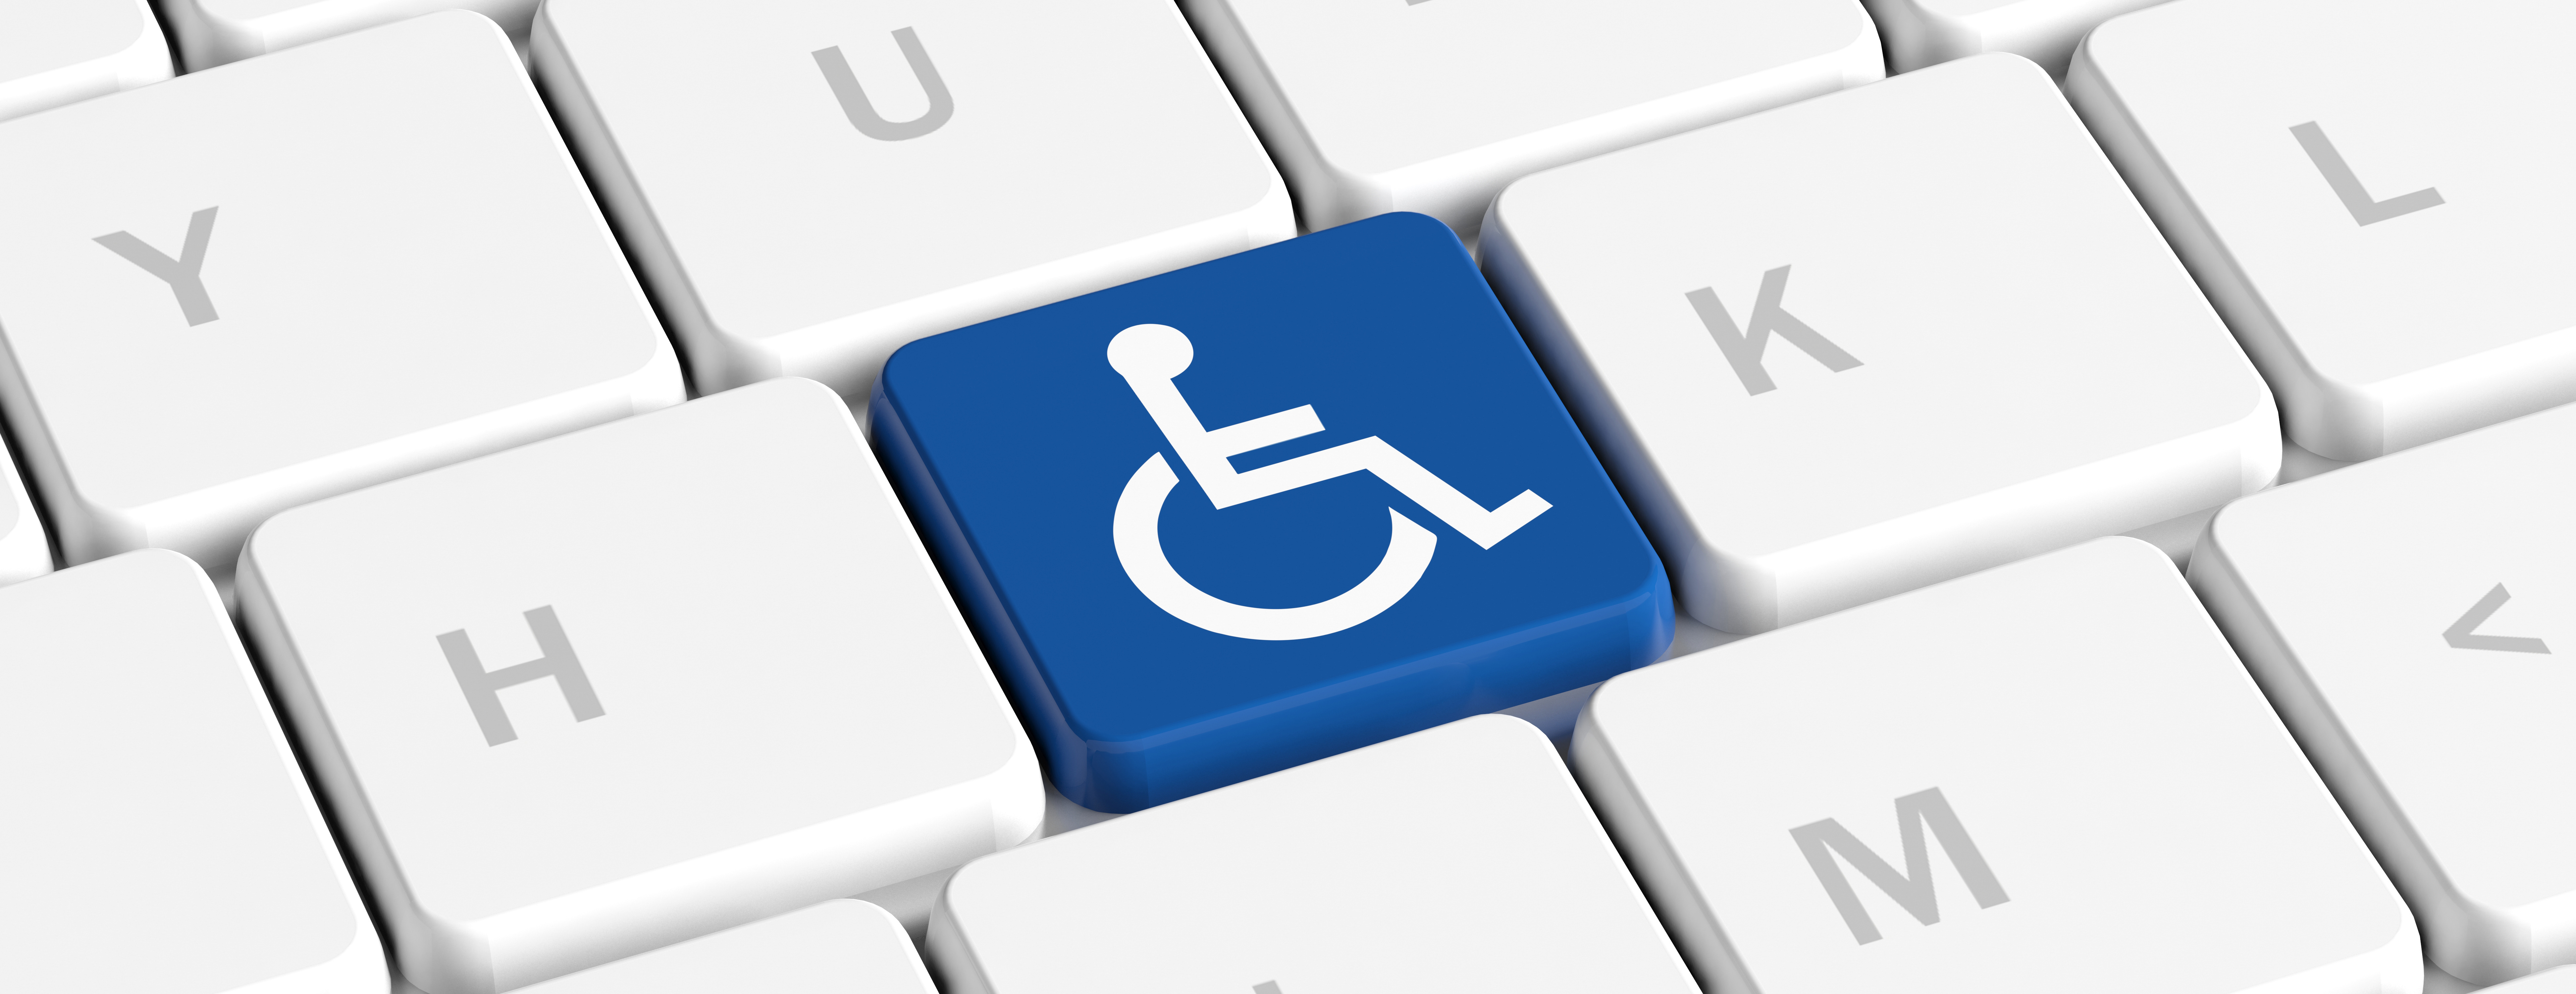 White Computer Keyboard with gray letters and 1 blue key with white wheel chair icon.